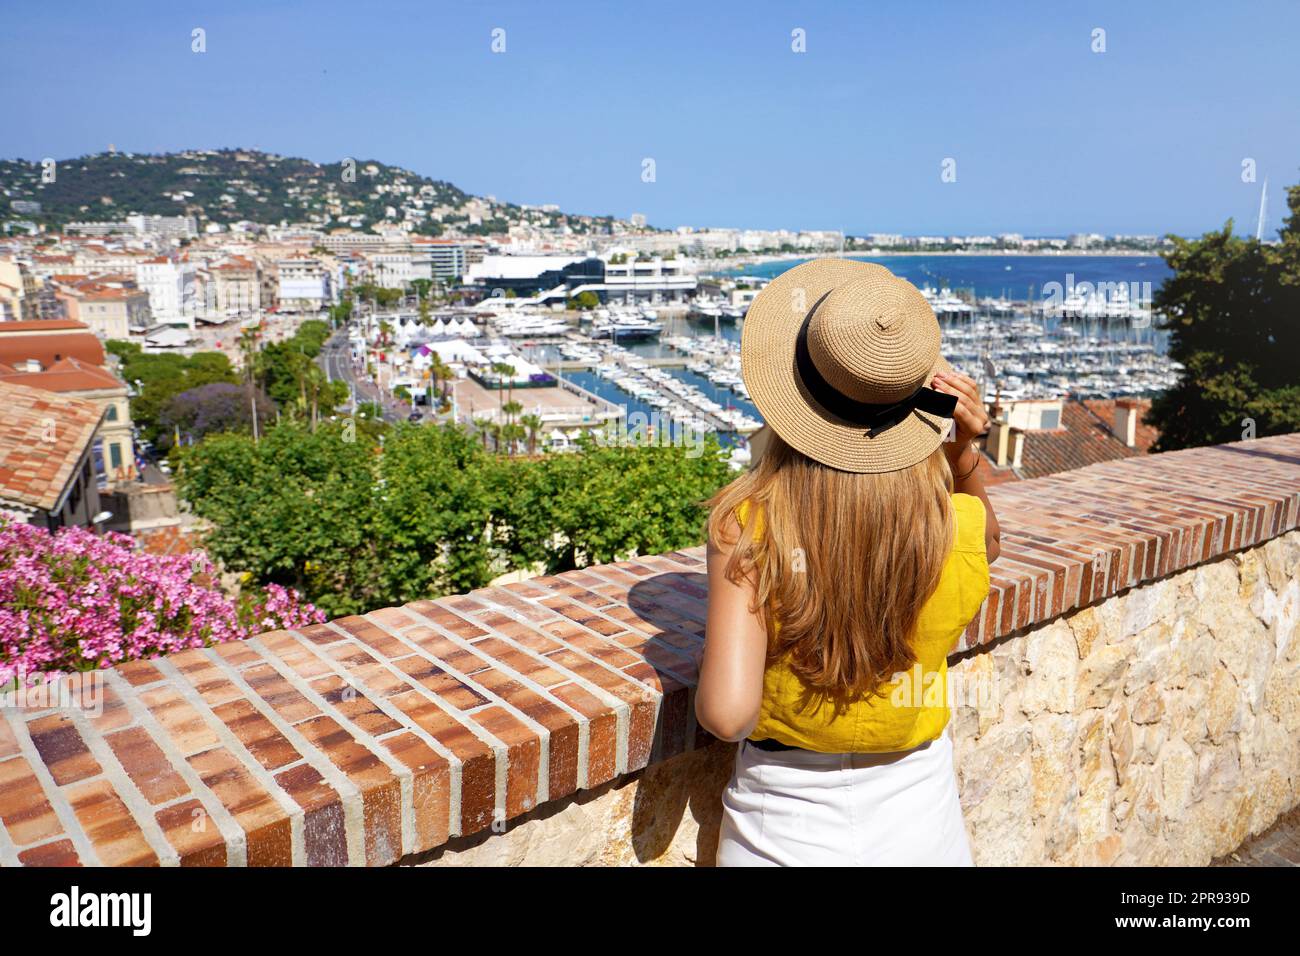 Visiting French Riviera. Back view of pretty girl enjoying ciyscape of Cannes, France. Stock Photo